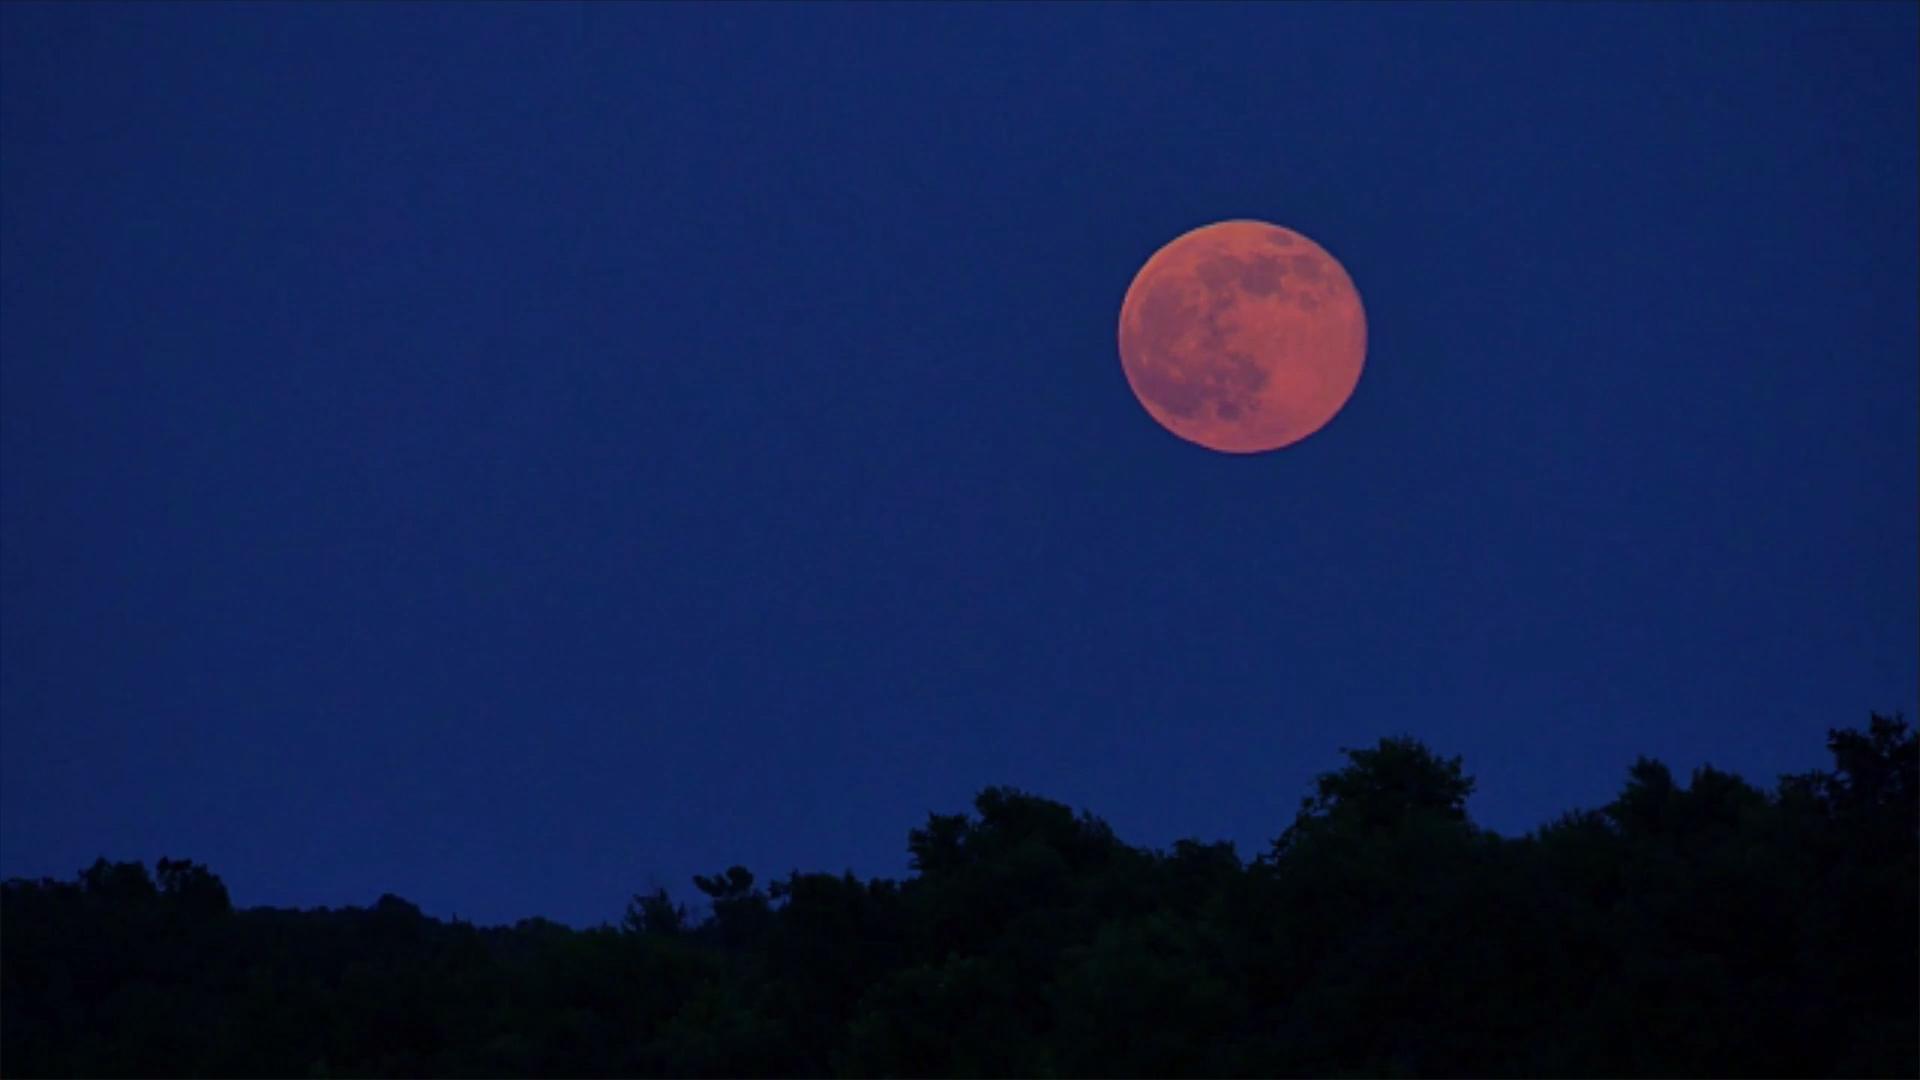 Strawberry Moon 2018: How to See the Full Strawberry Moon This June